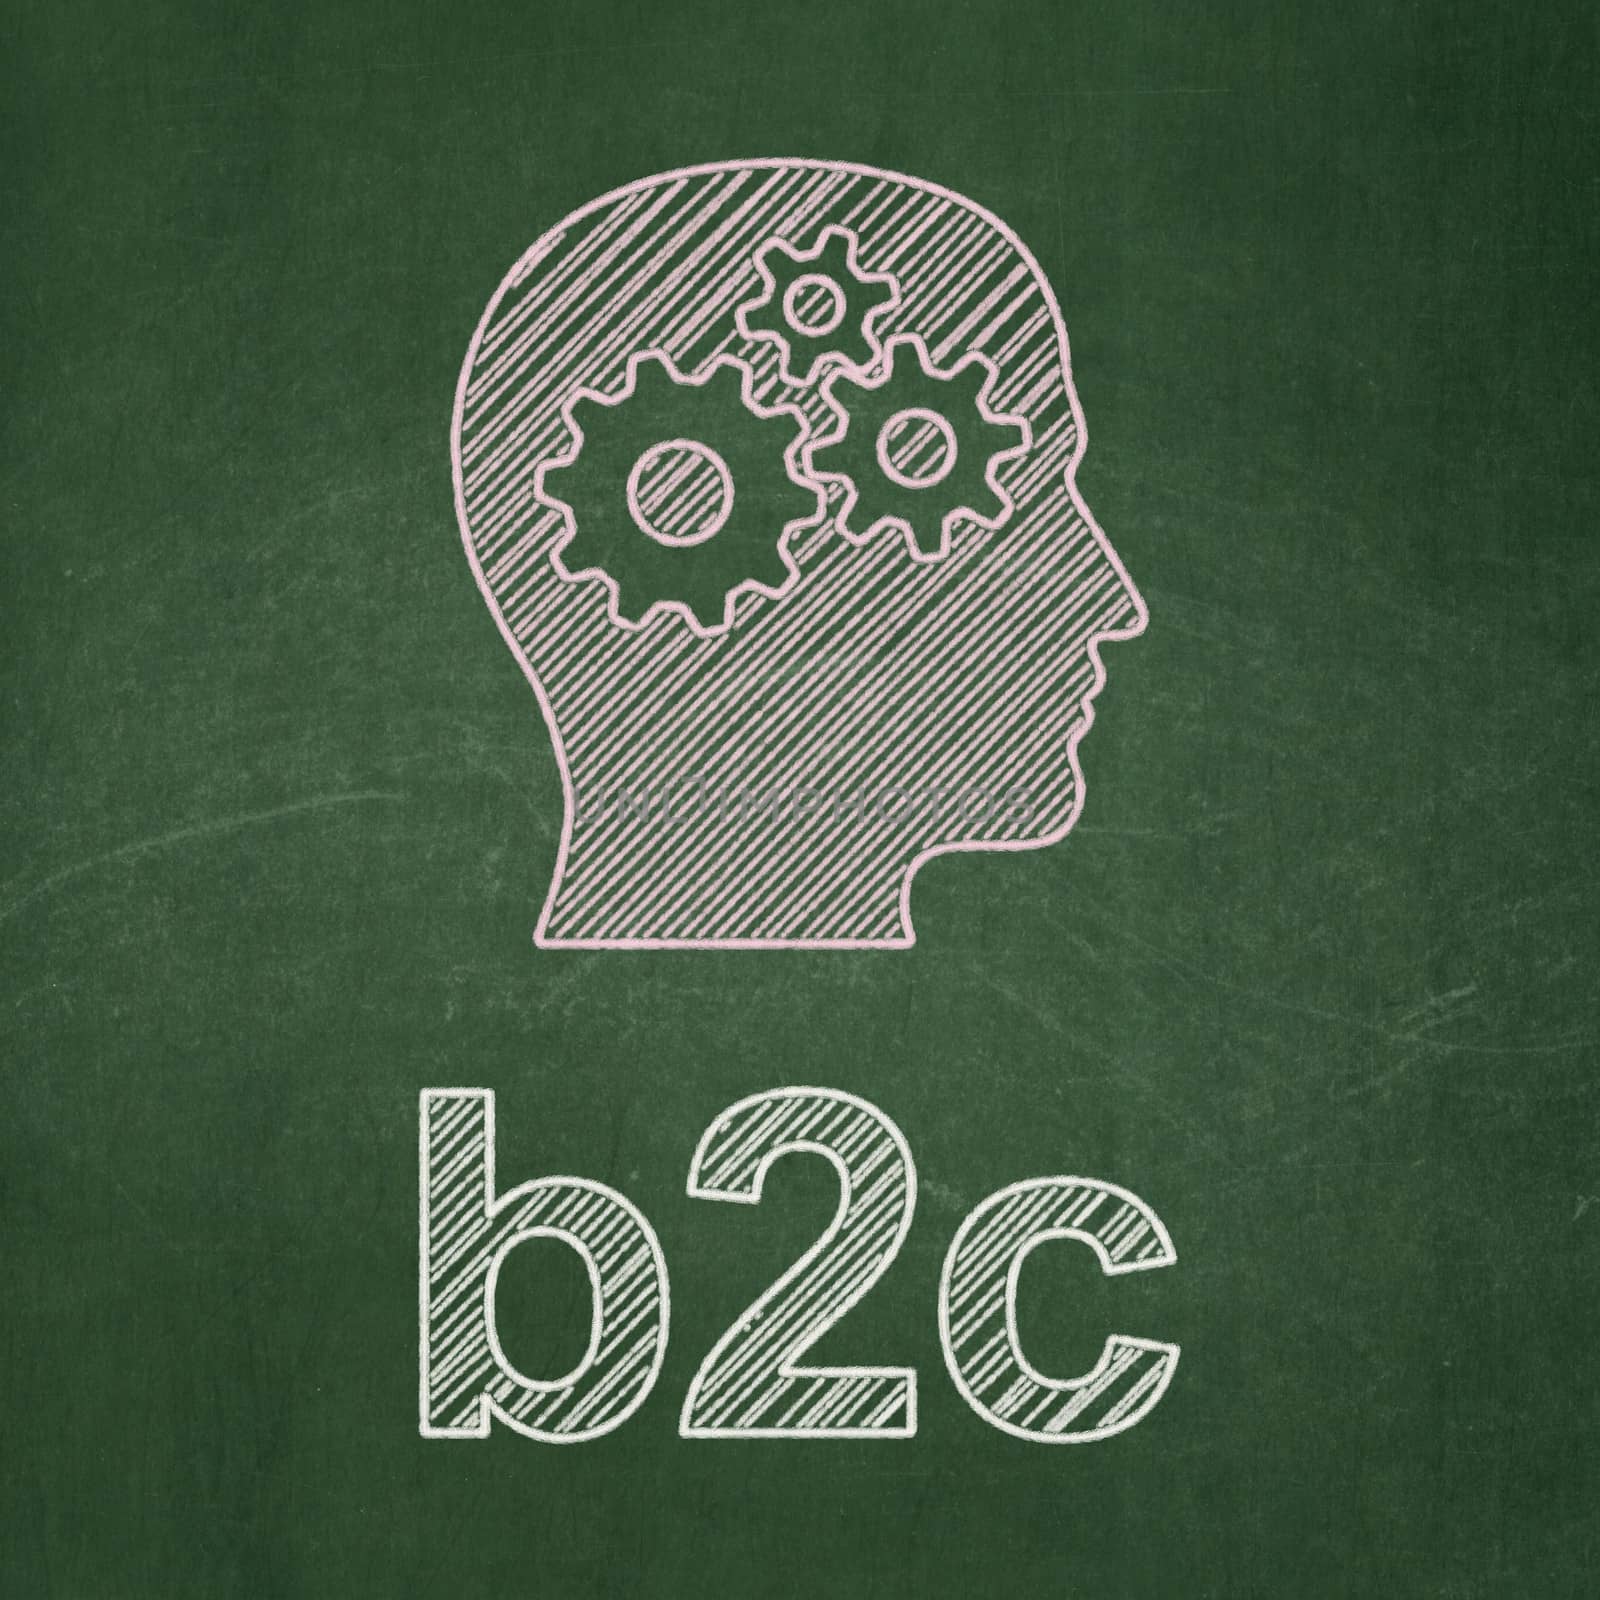 Business concept: Head With Gears icon and text B2c on Green chalkboard background, 3d render